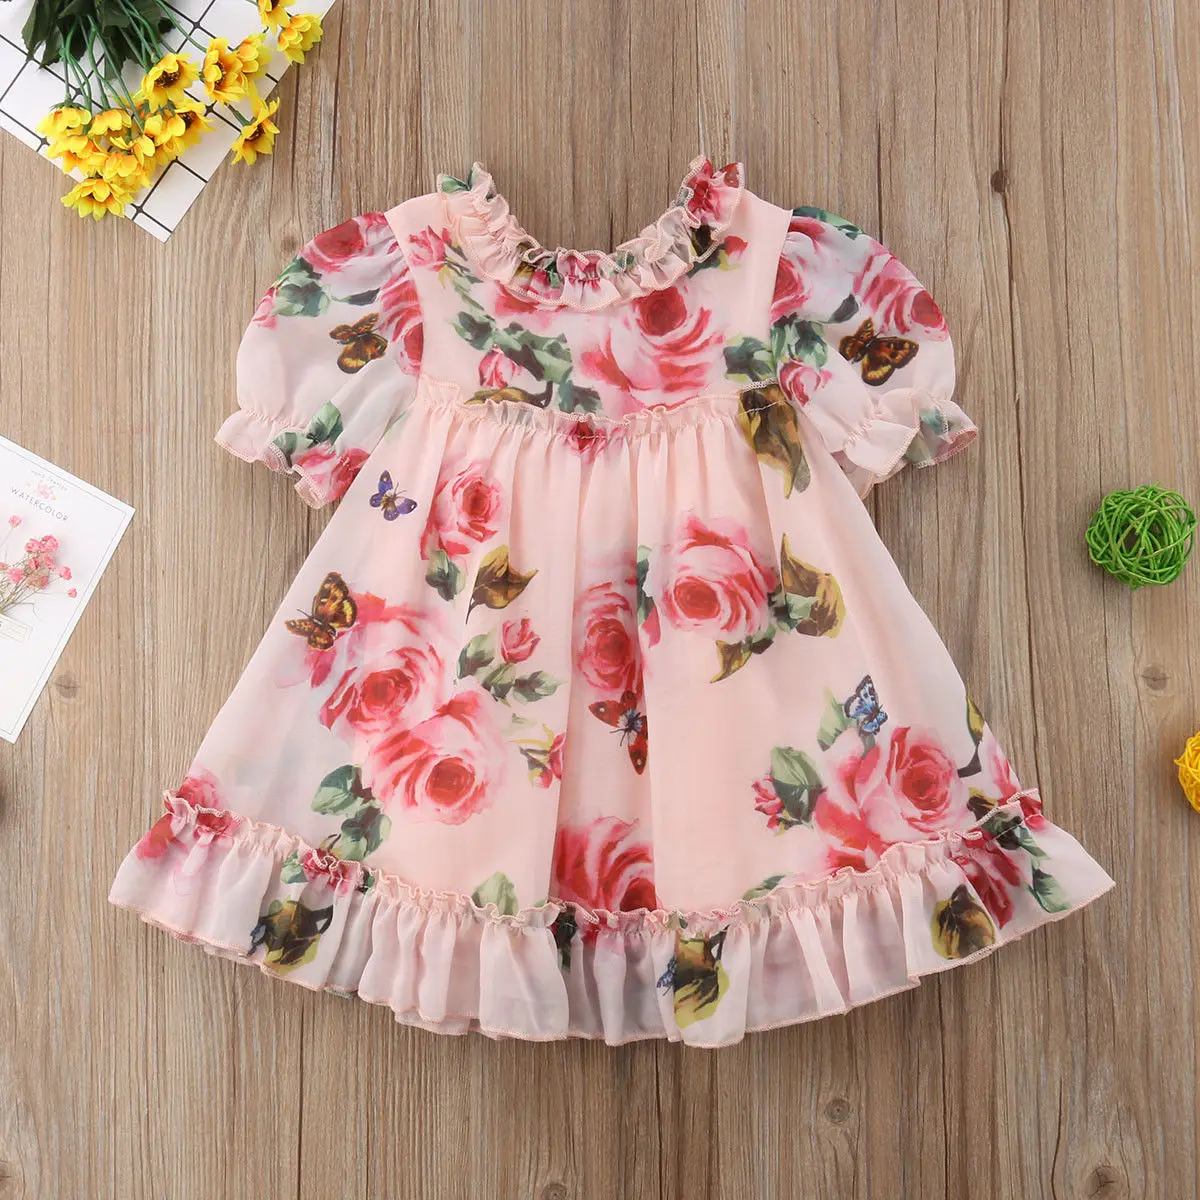 

6M-4Y Newborn Kids Baby Girls Floral Dress Infant Girl Princess Party Pageant Tulle Dress Sundress Summer